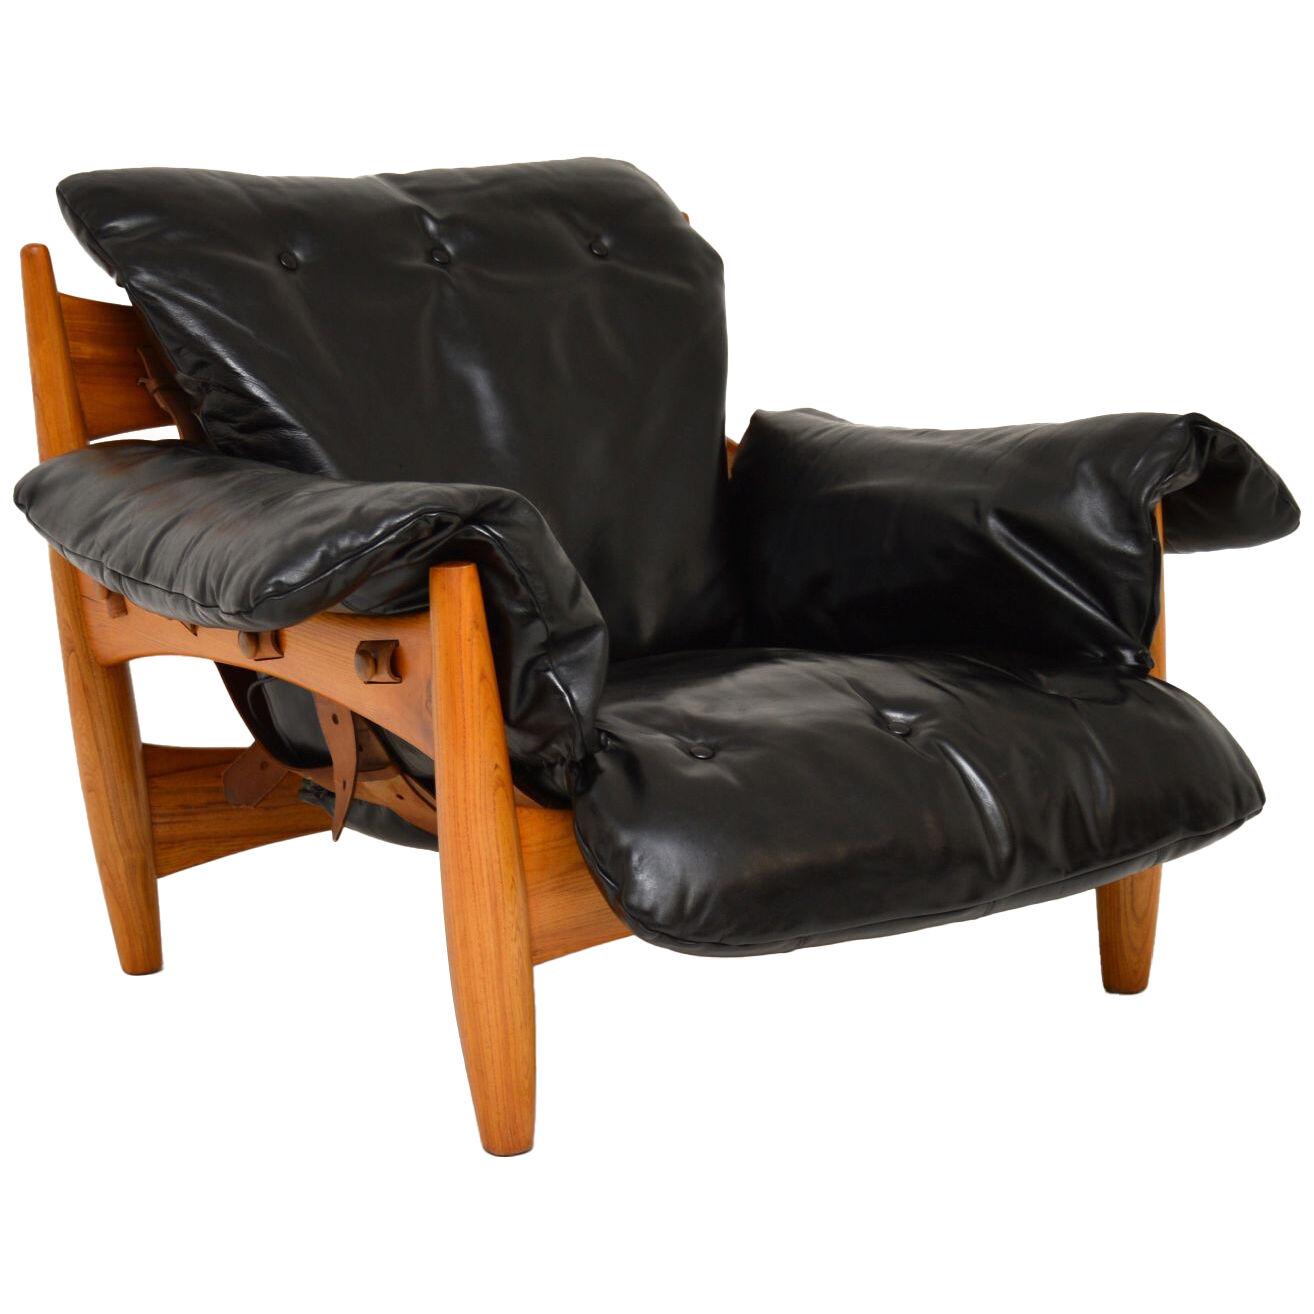 Vintage "Sheriff" Leather Armchair by Sergio Rodrigues for ISA